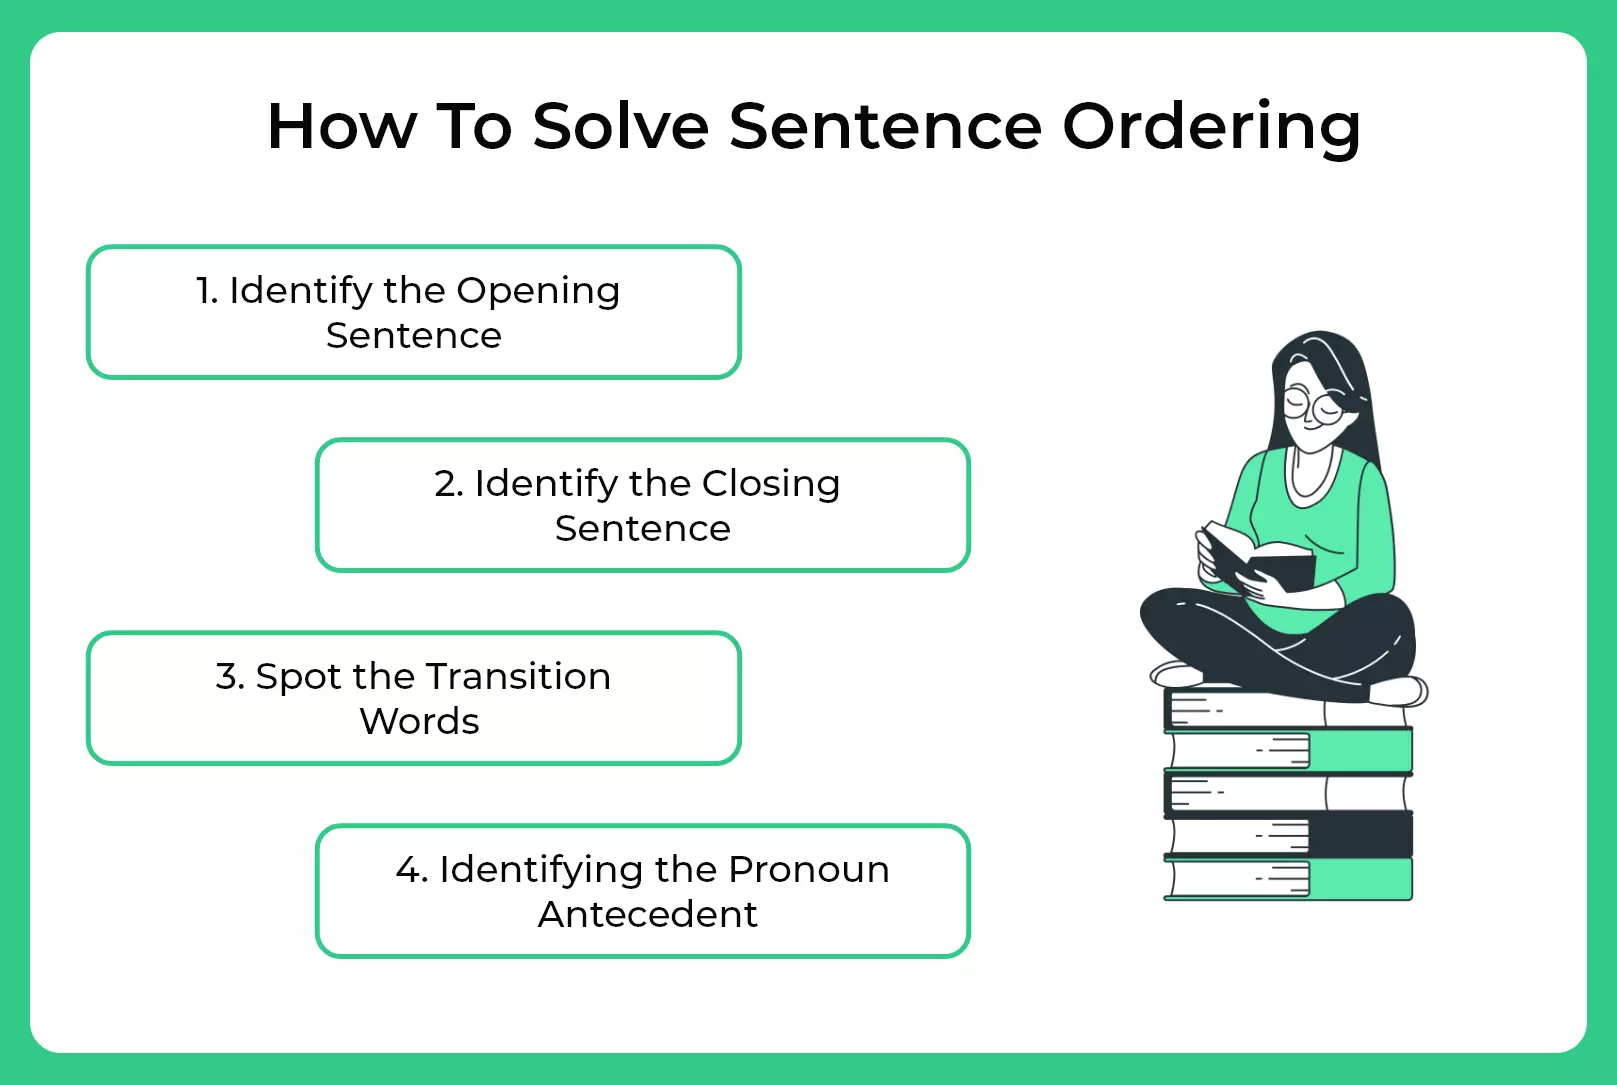 How To Solve Sentence Ordering